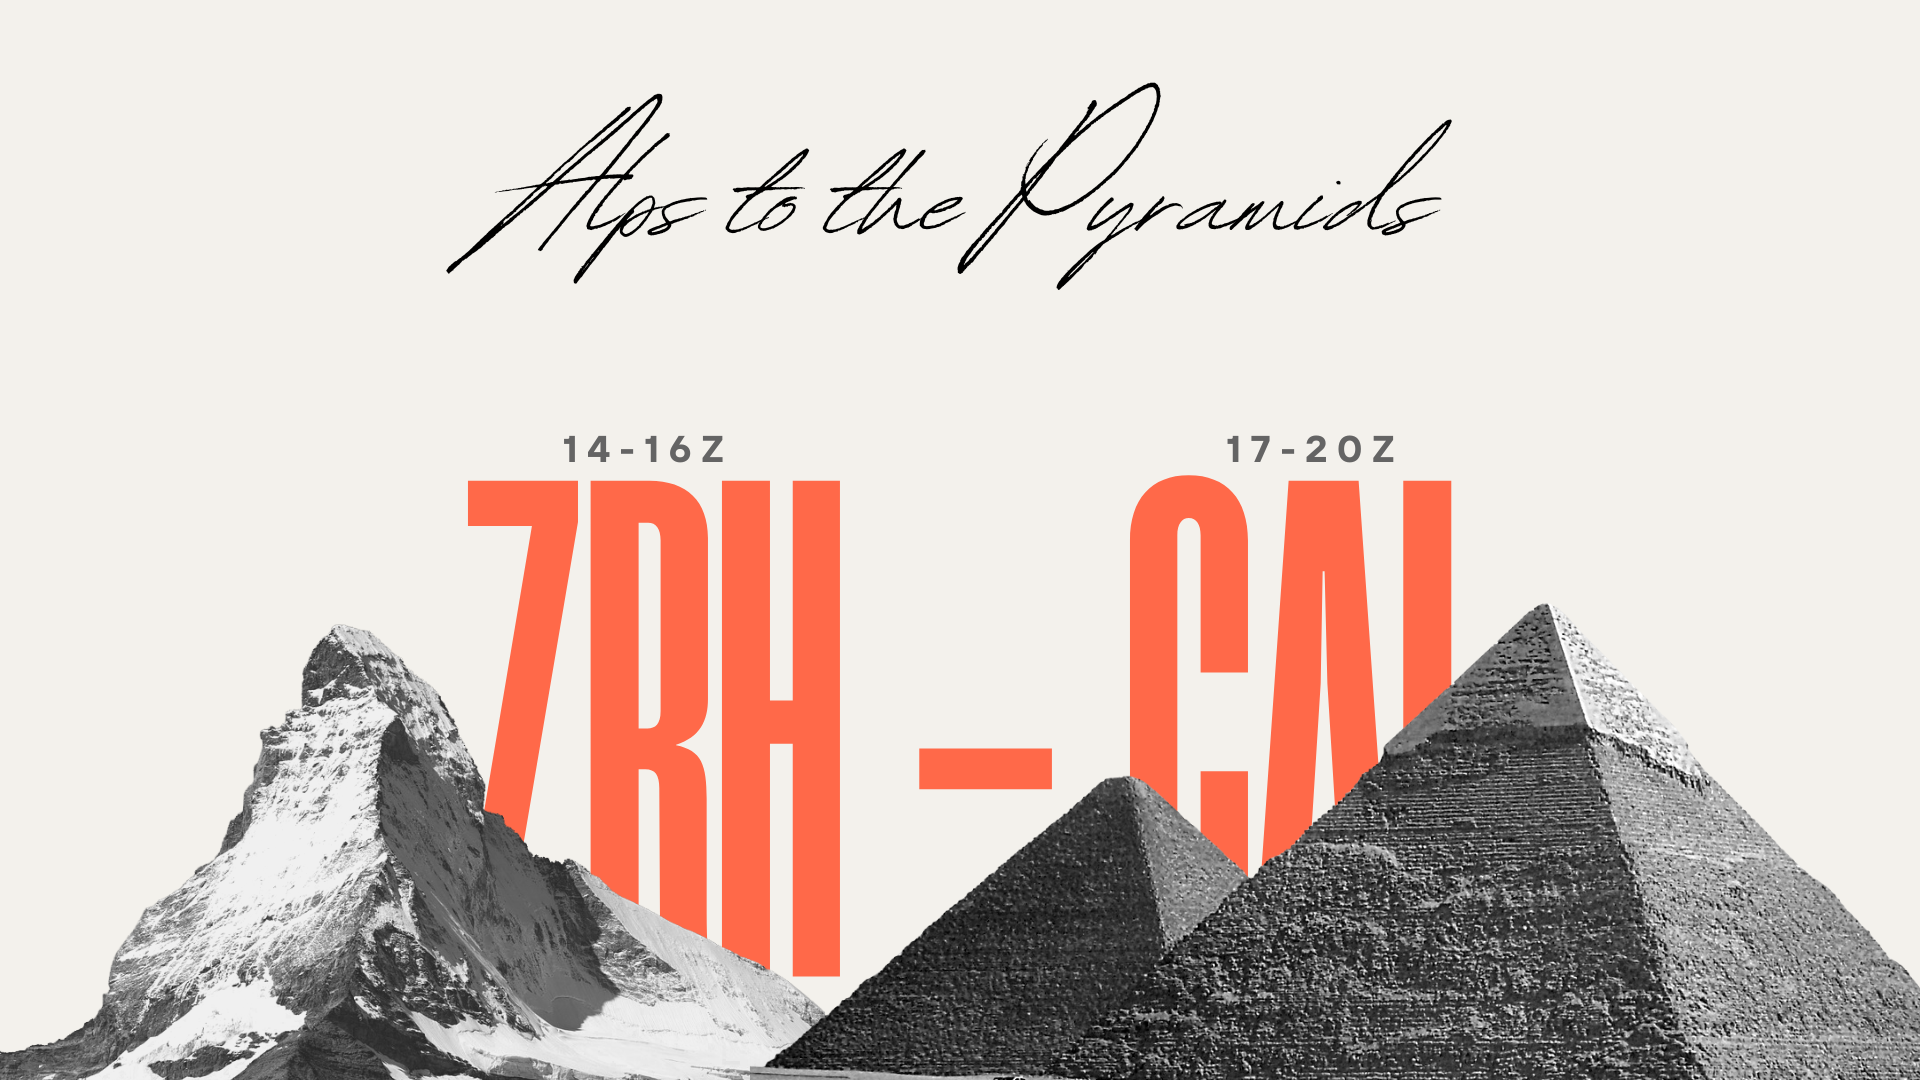 Alps to the Pyramids - Virtual Norwegian Events